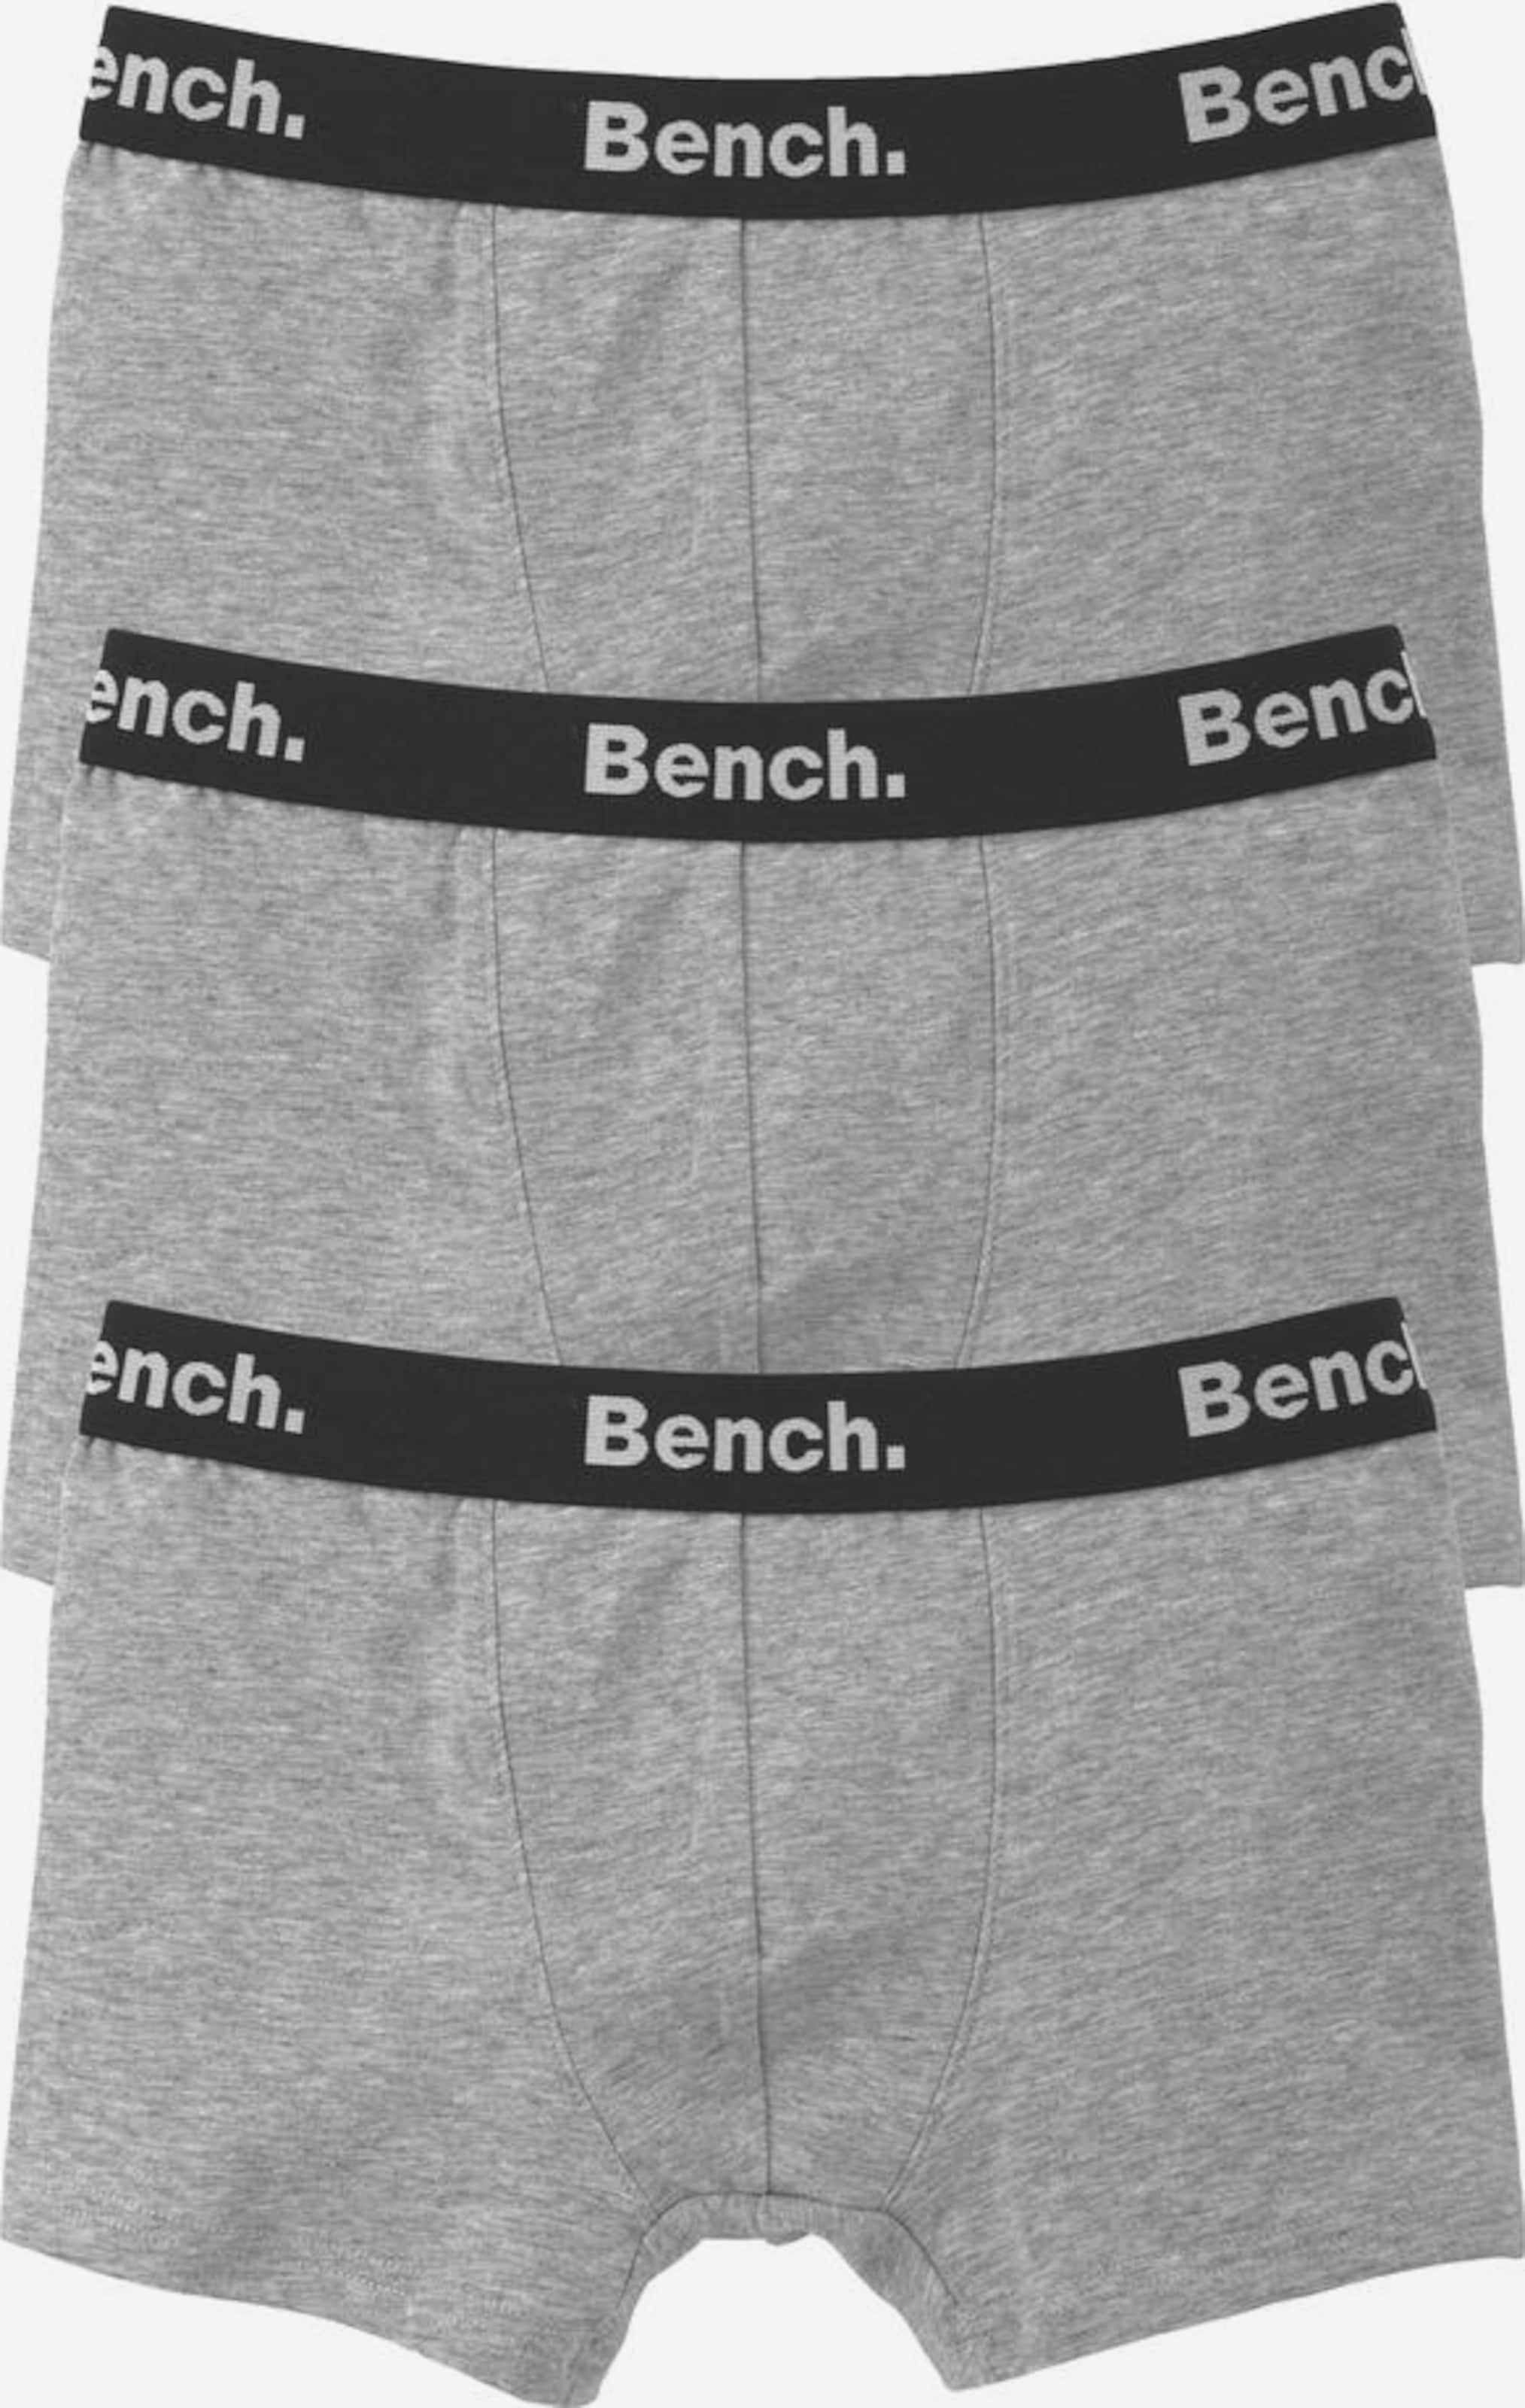 BENCH Boxershorts (3 Stück) in Graumeliert | ABOUT YOU | Boxer anliegend